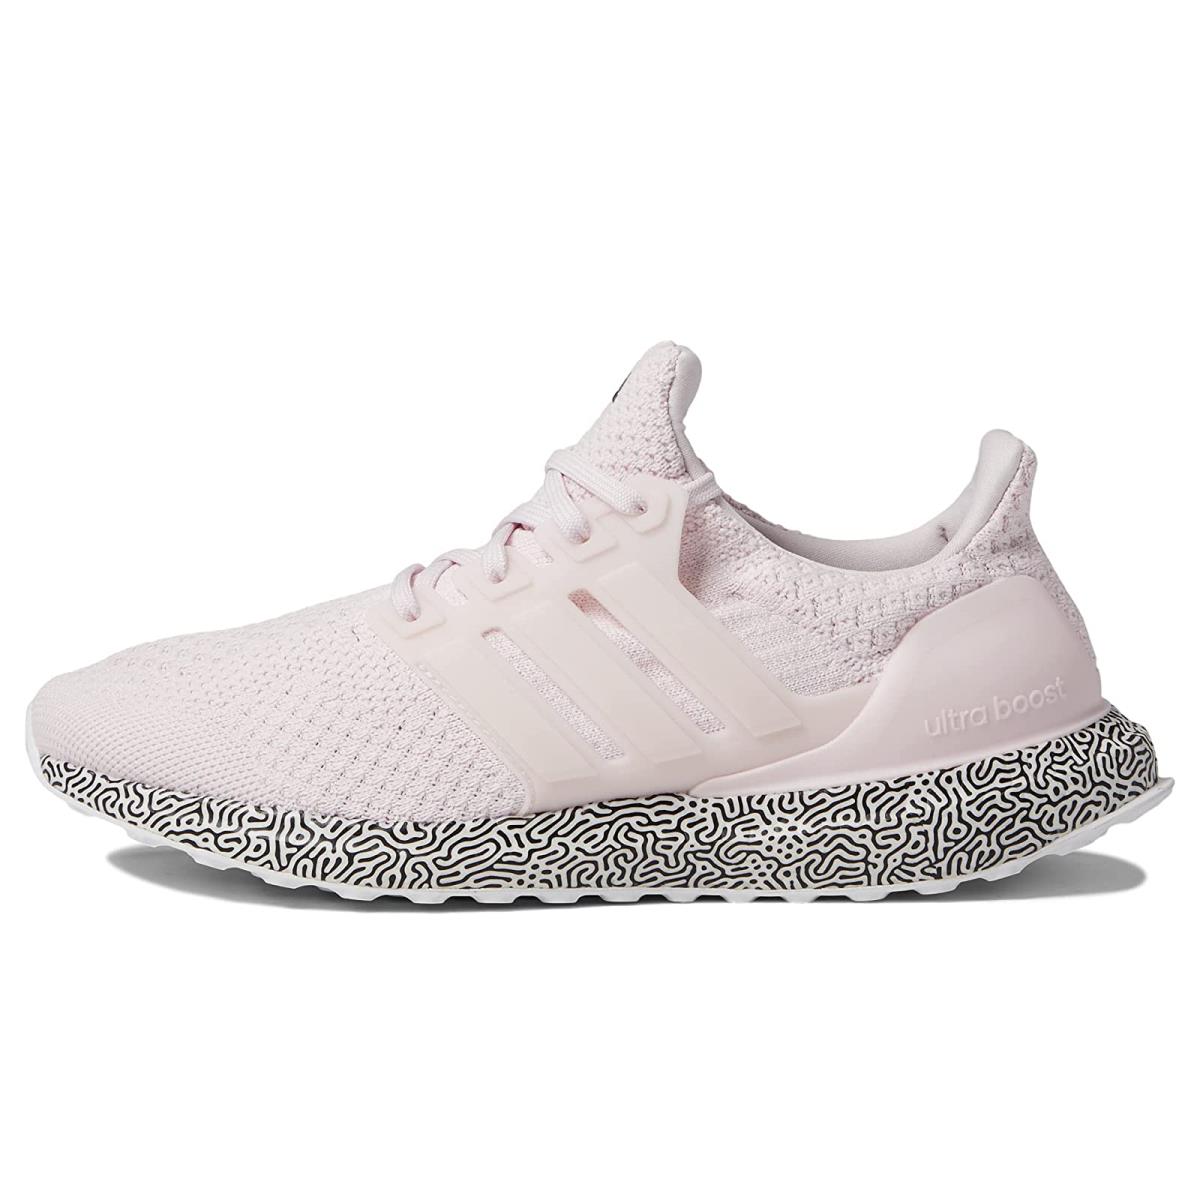 Womens UltraBOOST DNA Running Shoes in Pink/Almost Pink Size 5.5 Knit Finish Line Women Sport & Swimwear Sportswear Sports Shoes Running 